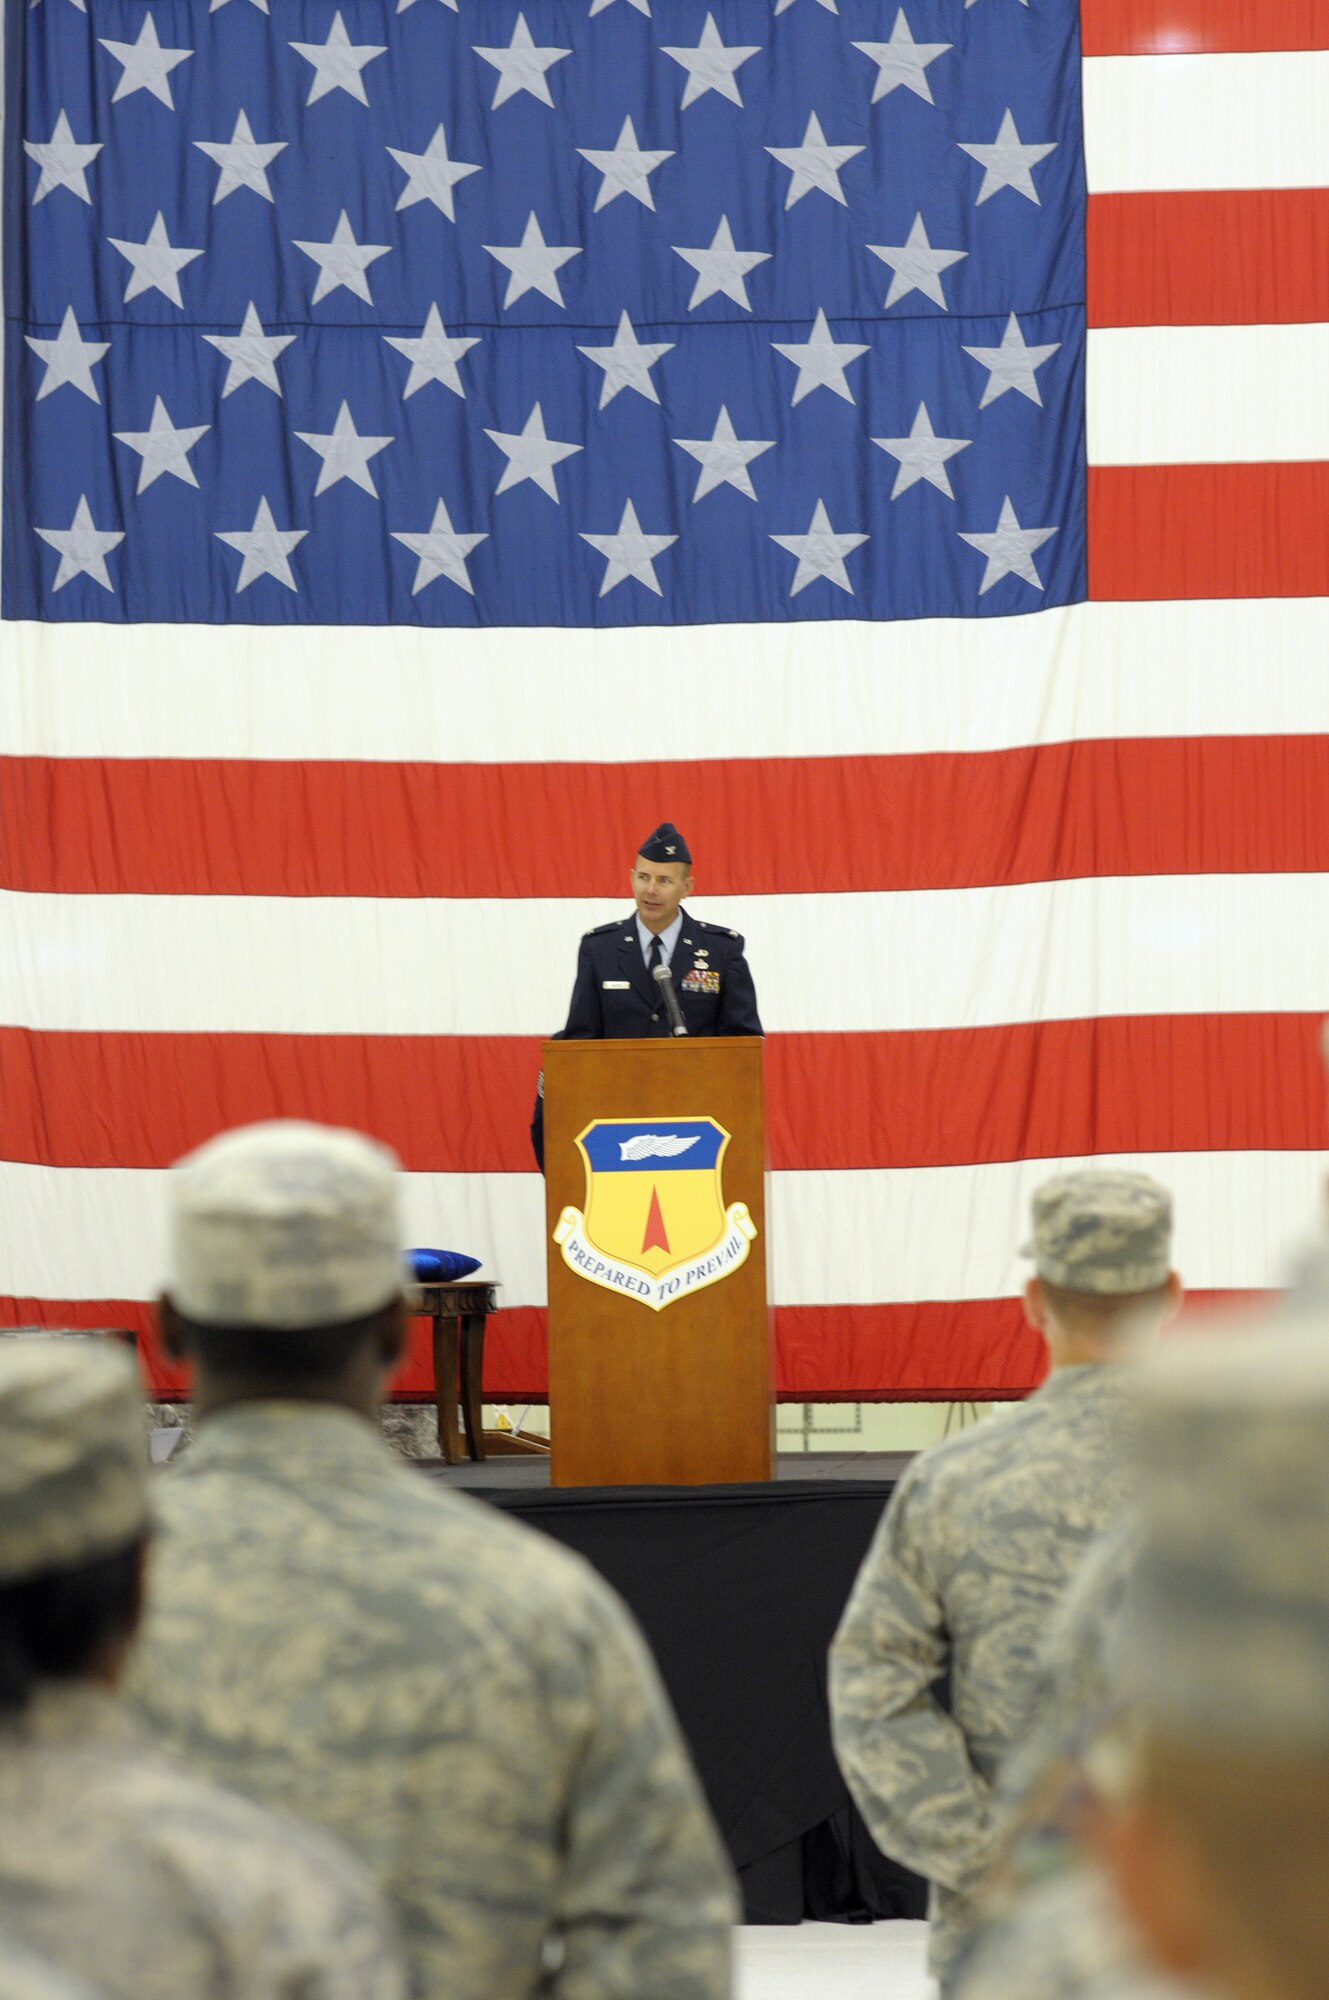 ANDERSEN AIR FORCE BASE, Guam - Incoming commander, Col. Alan Weider addresses the attendees of the 36th Mission Support Group change of command after assuming command in Hangar 6 June 16. The change of command ceremony transferred leadership of the 36th MSG from Col. Mark Talley to Colonel Wieder. (U.S. Air Force photo by Tech. Sgt. Michael Boquette)
